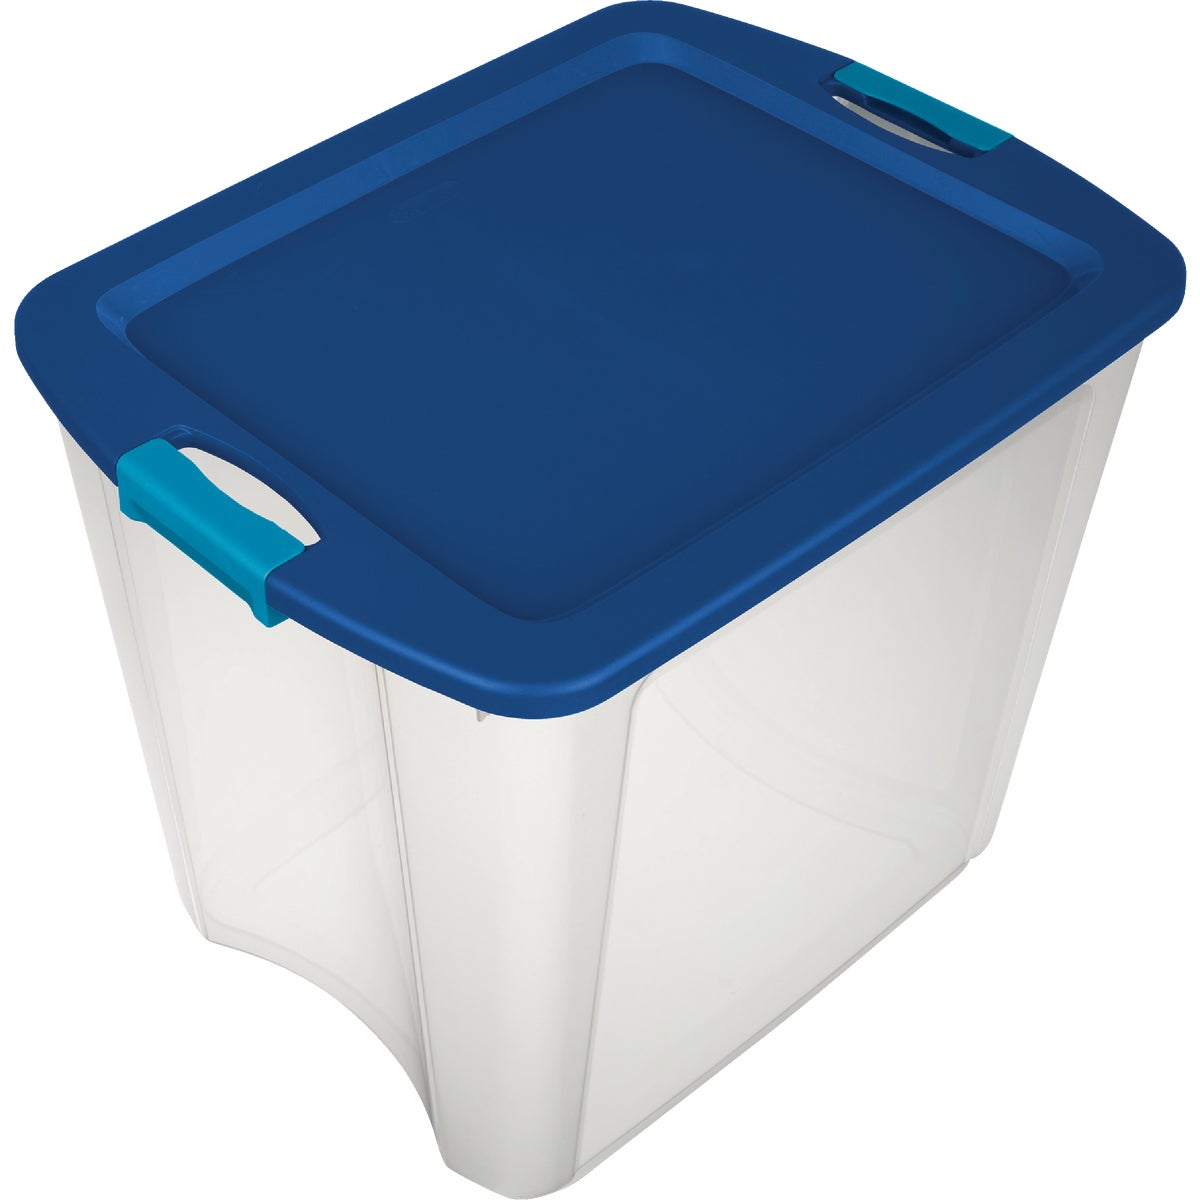 Sterilite 26 Gal. Clear Base with Blue Latch & Carry Storage Tote